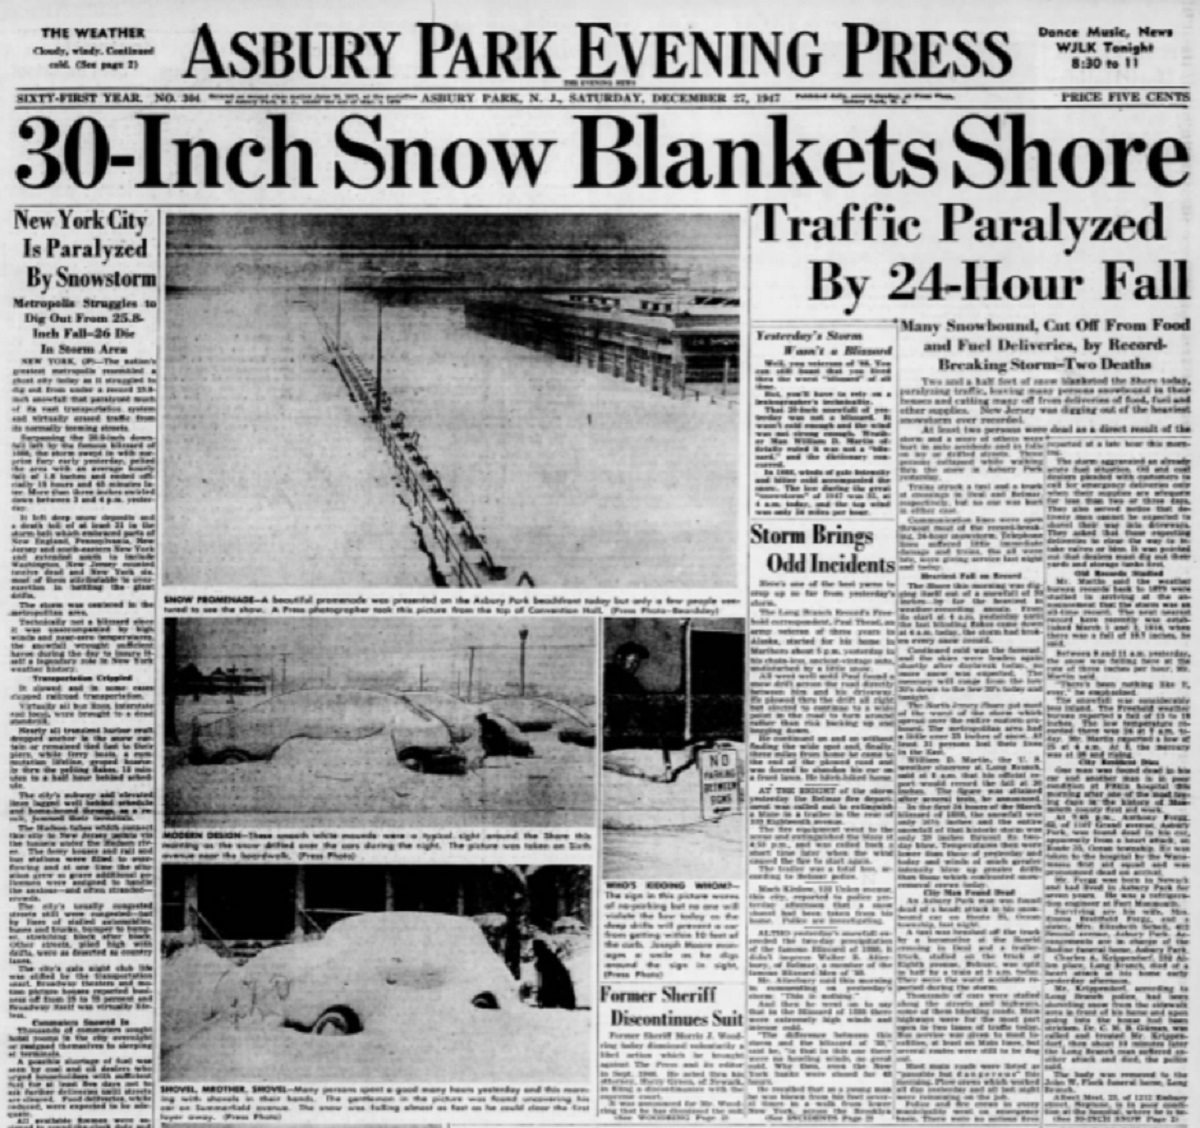 The December 27 Asbury Park Evening Press documented the major stormstorm that struck New Jersey in 1947. Image: Asbury Park Evening Press / NWS